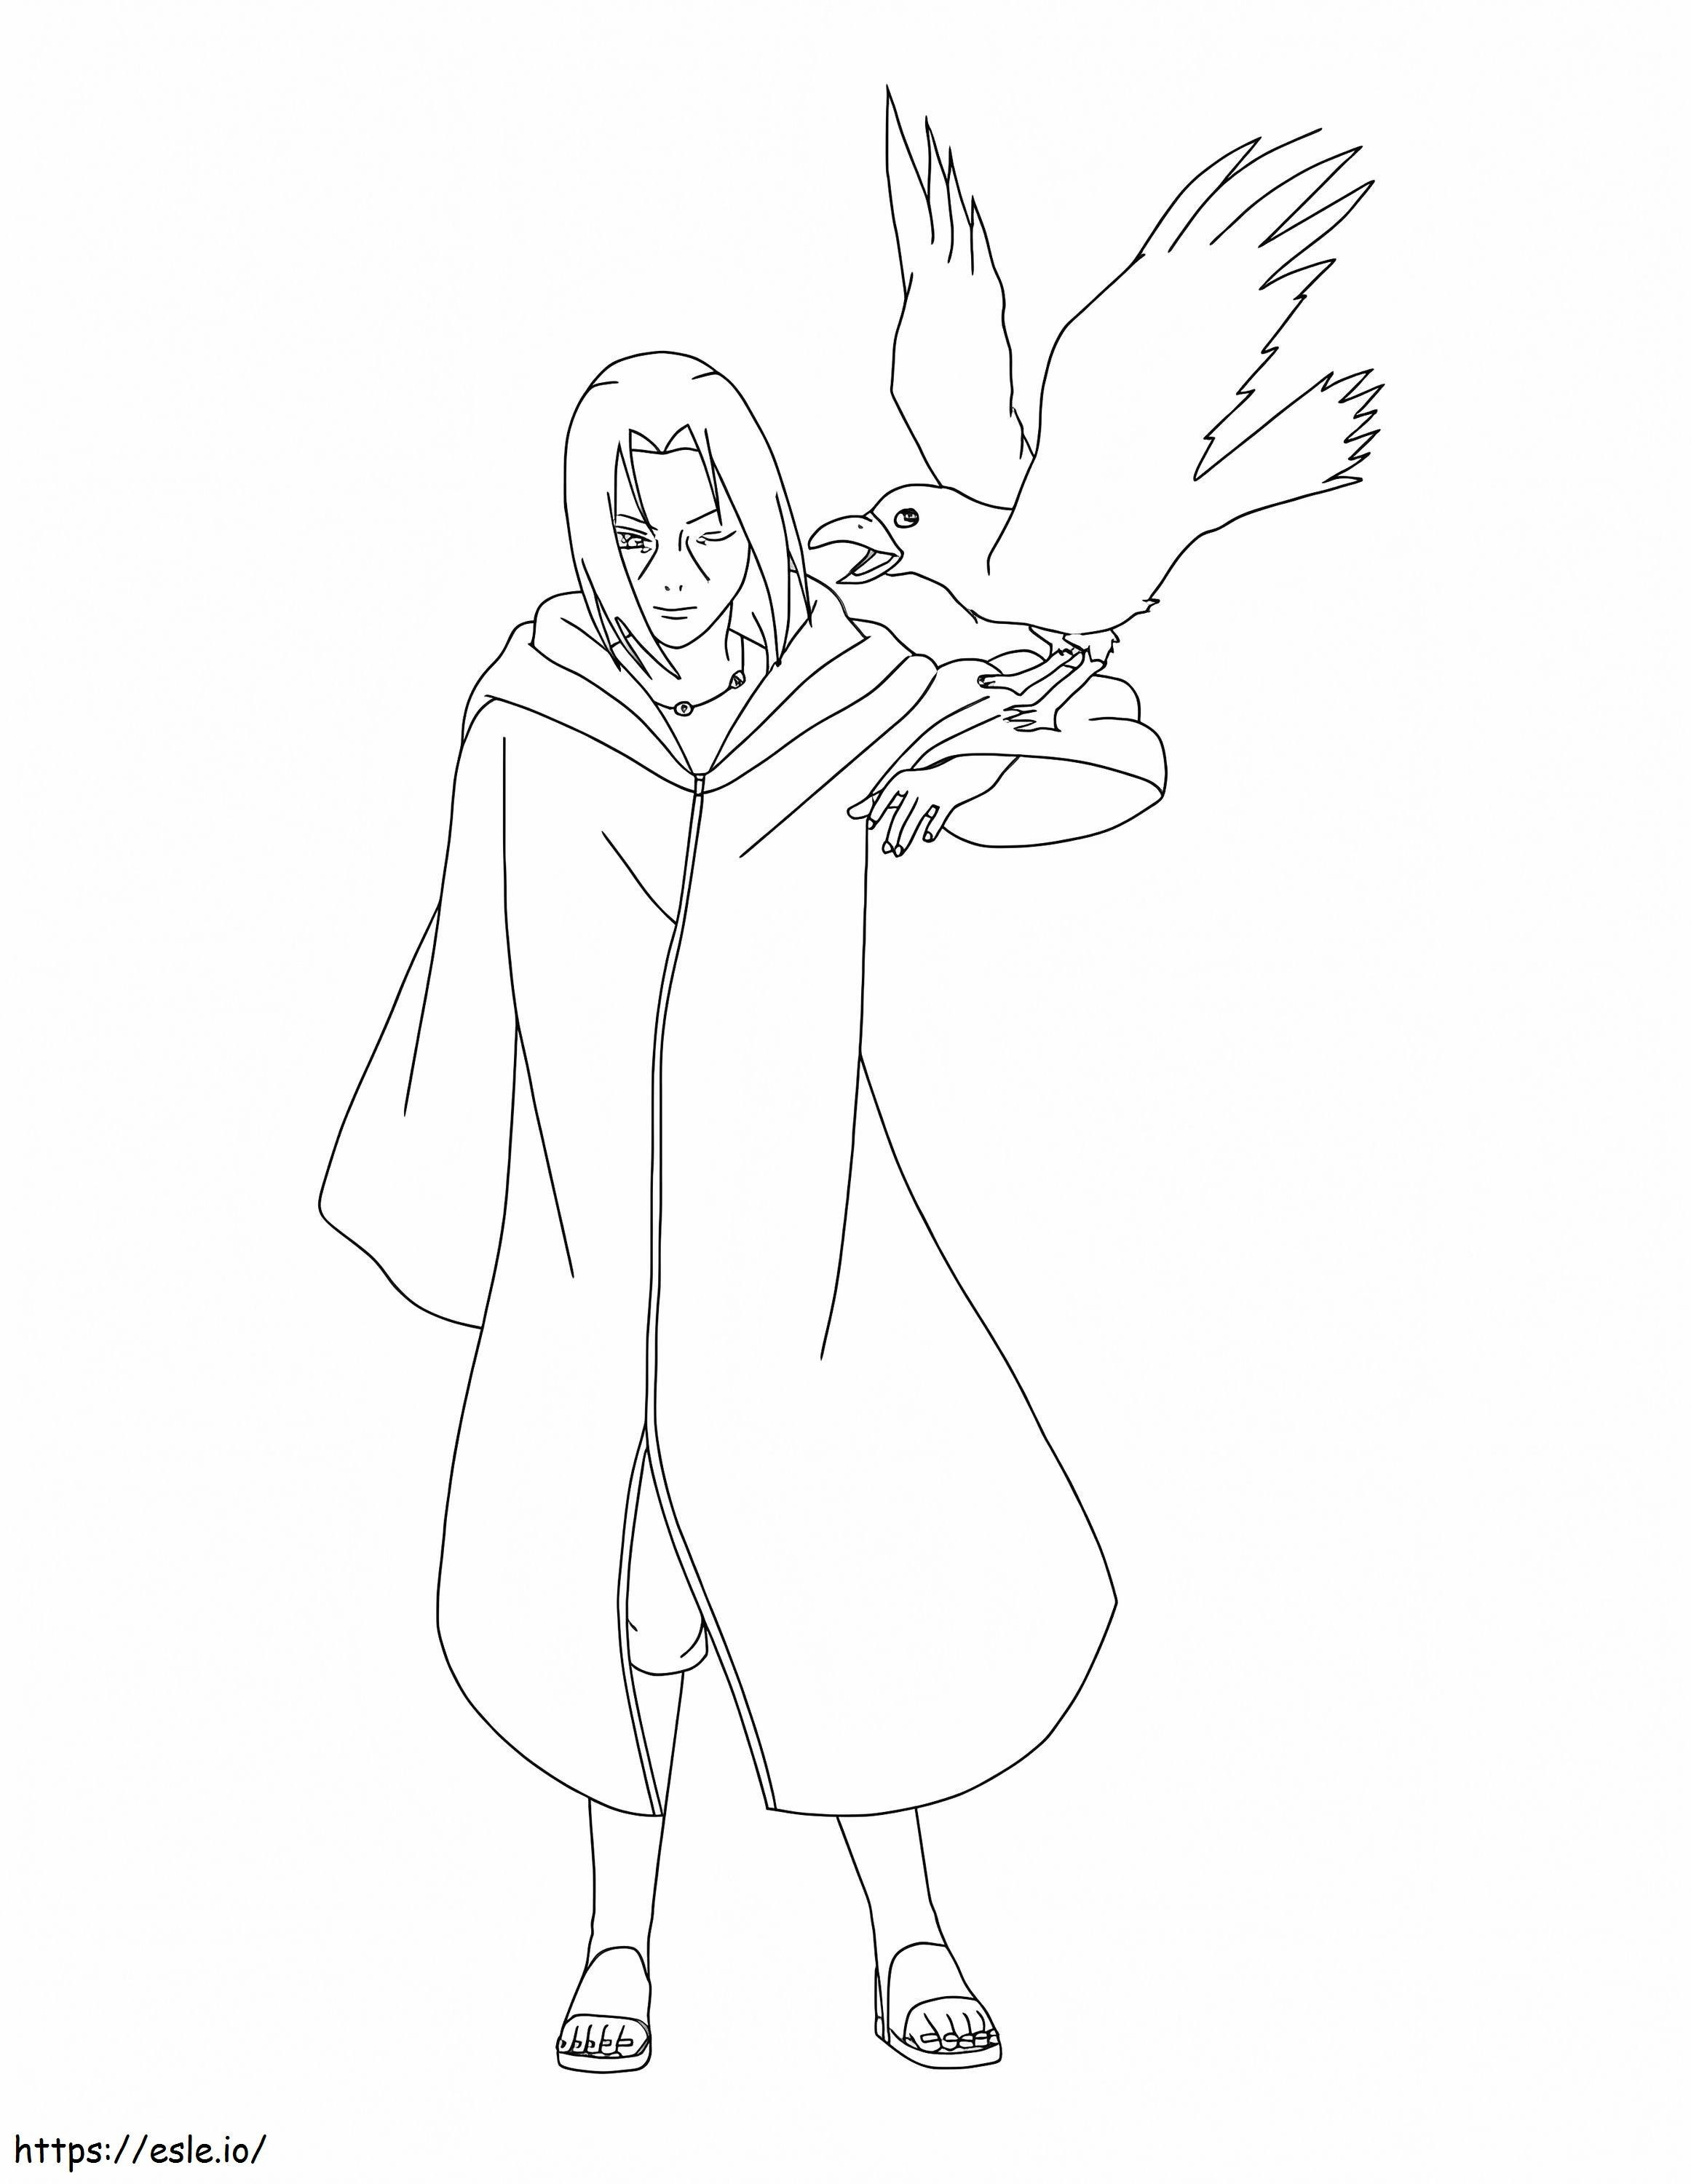 Itachi 13 coloring page